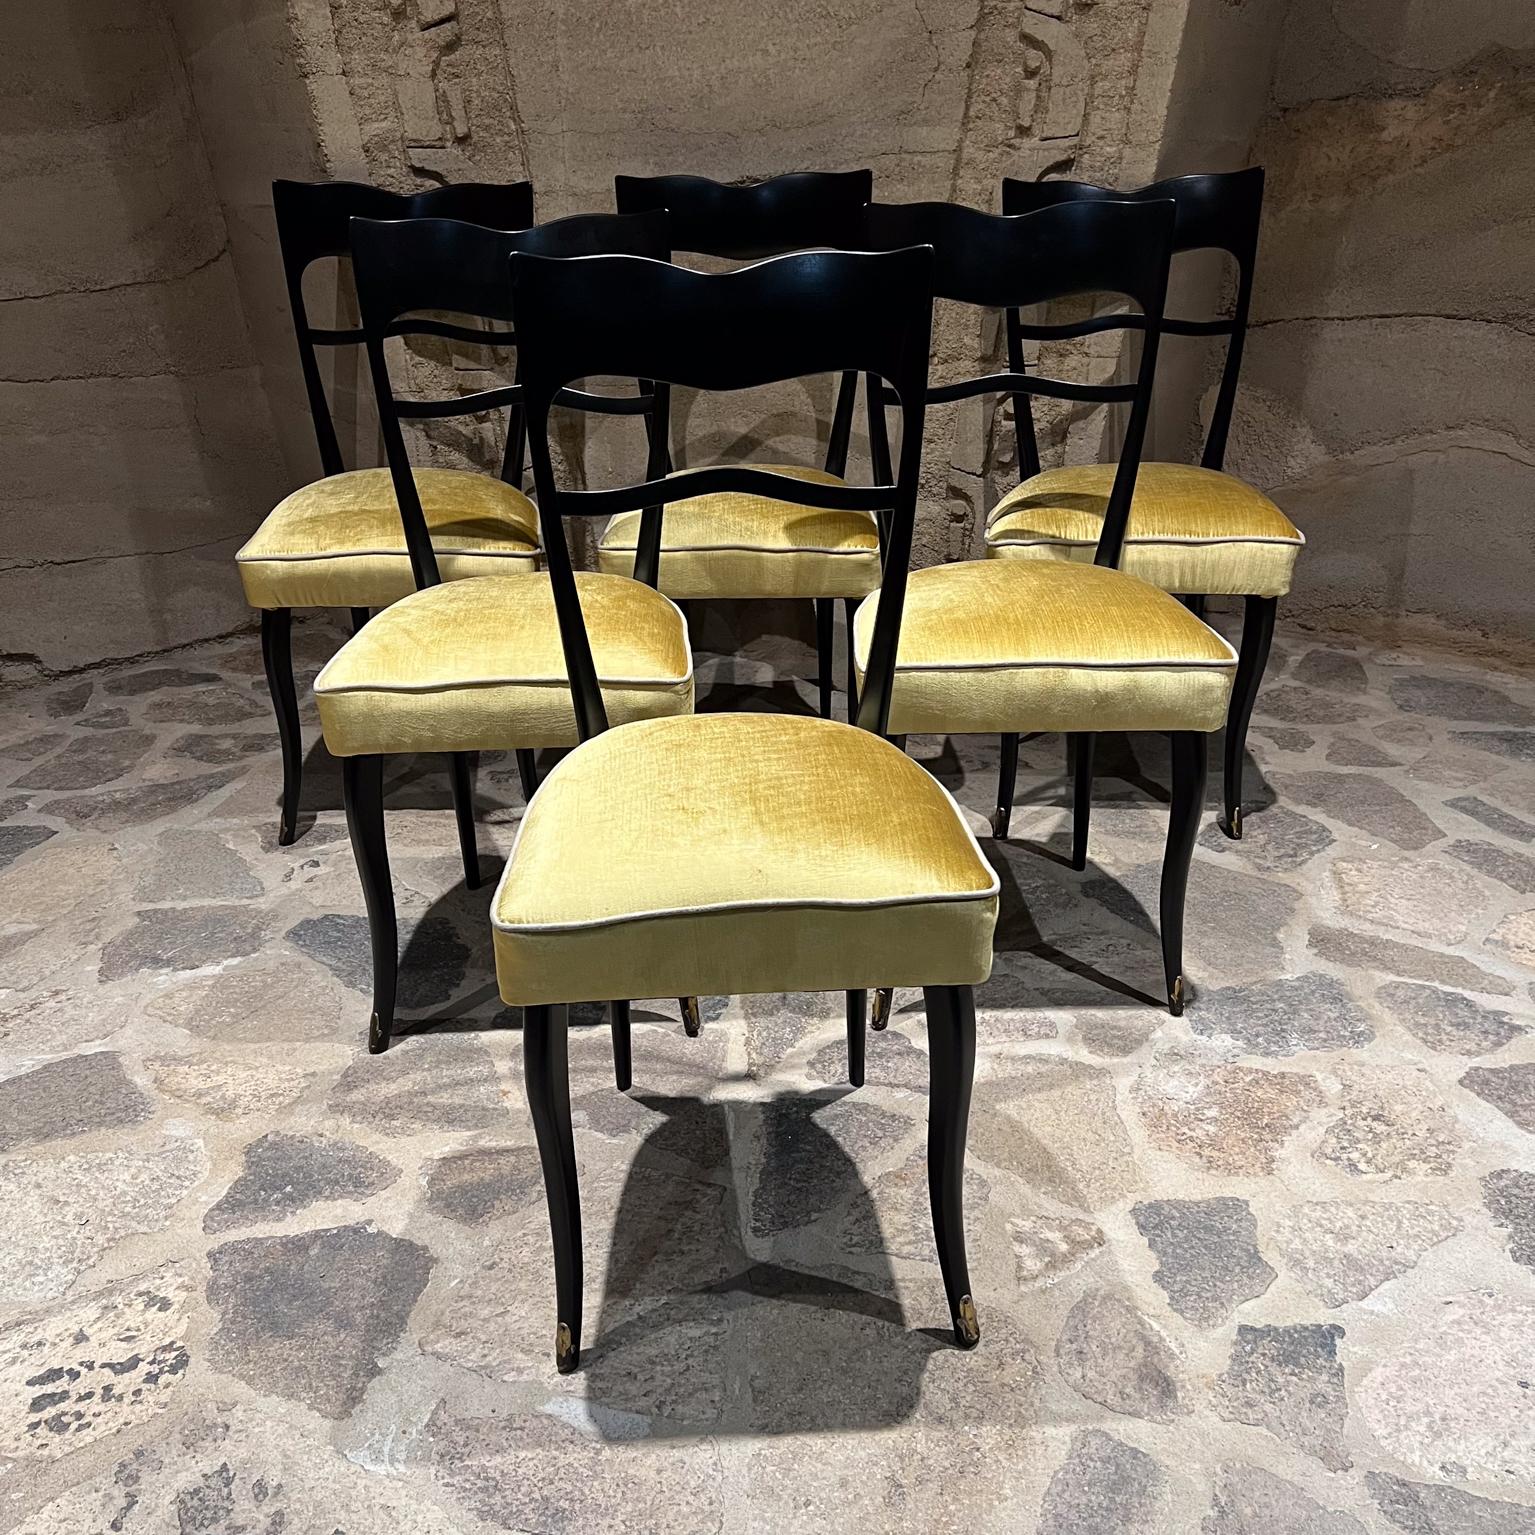 1950s Set of six (6) Italian dining chairs. Made in Italy
Sculptural wooden chairs elegantly curved clean modern lines.
No label
Design attributed to Ico and Luisa Parisi.
39.25 h x 16.63 w x 19 d Seat 19.5 h
Wood restored to original specification